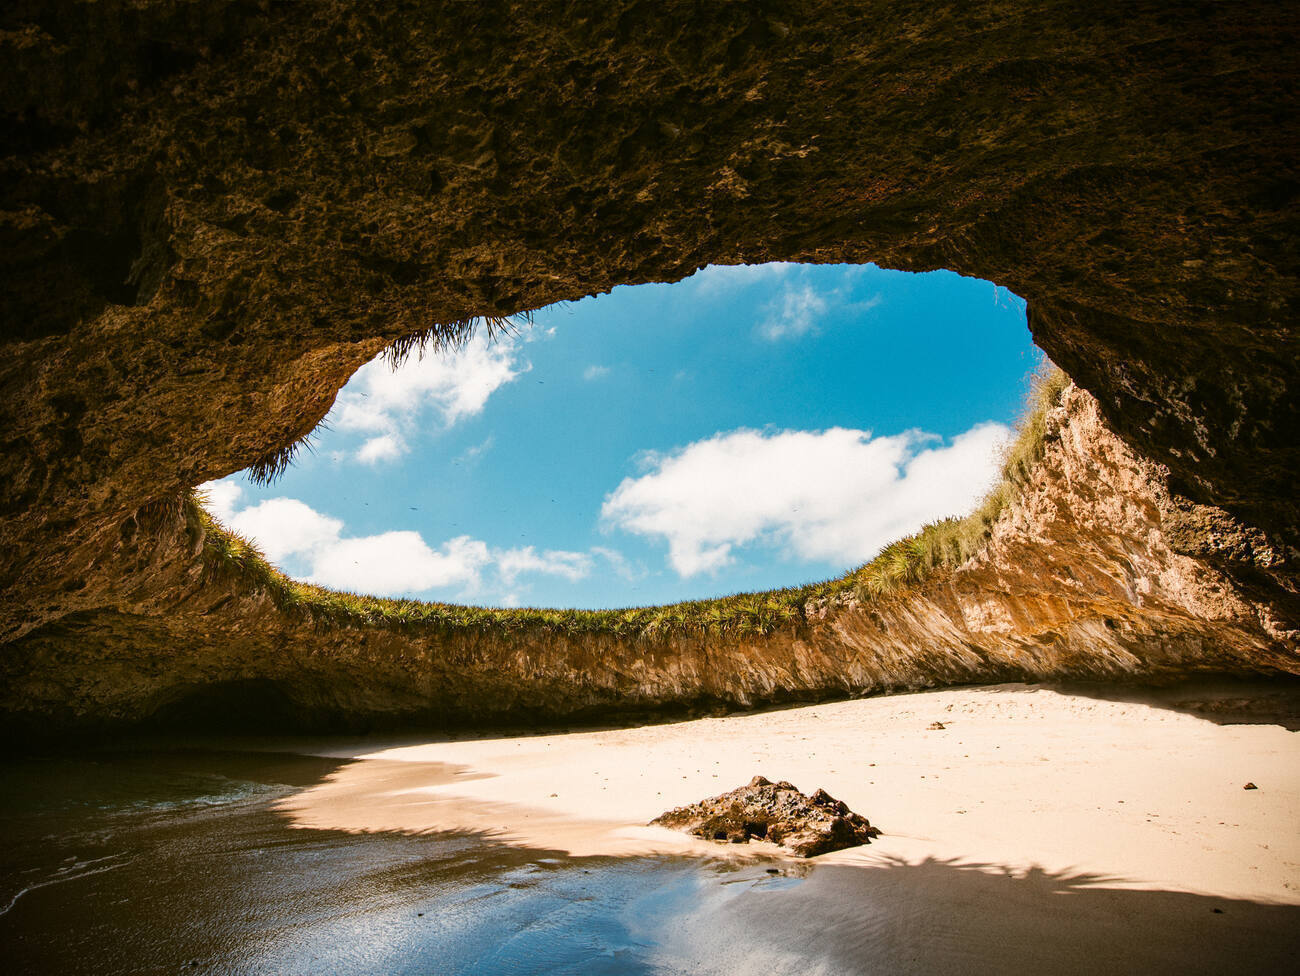 A hidden beach within a cavern. A massive circular opening, like the rim of a crater, looks out toward a blue sky.